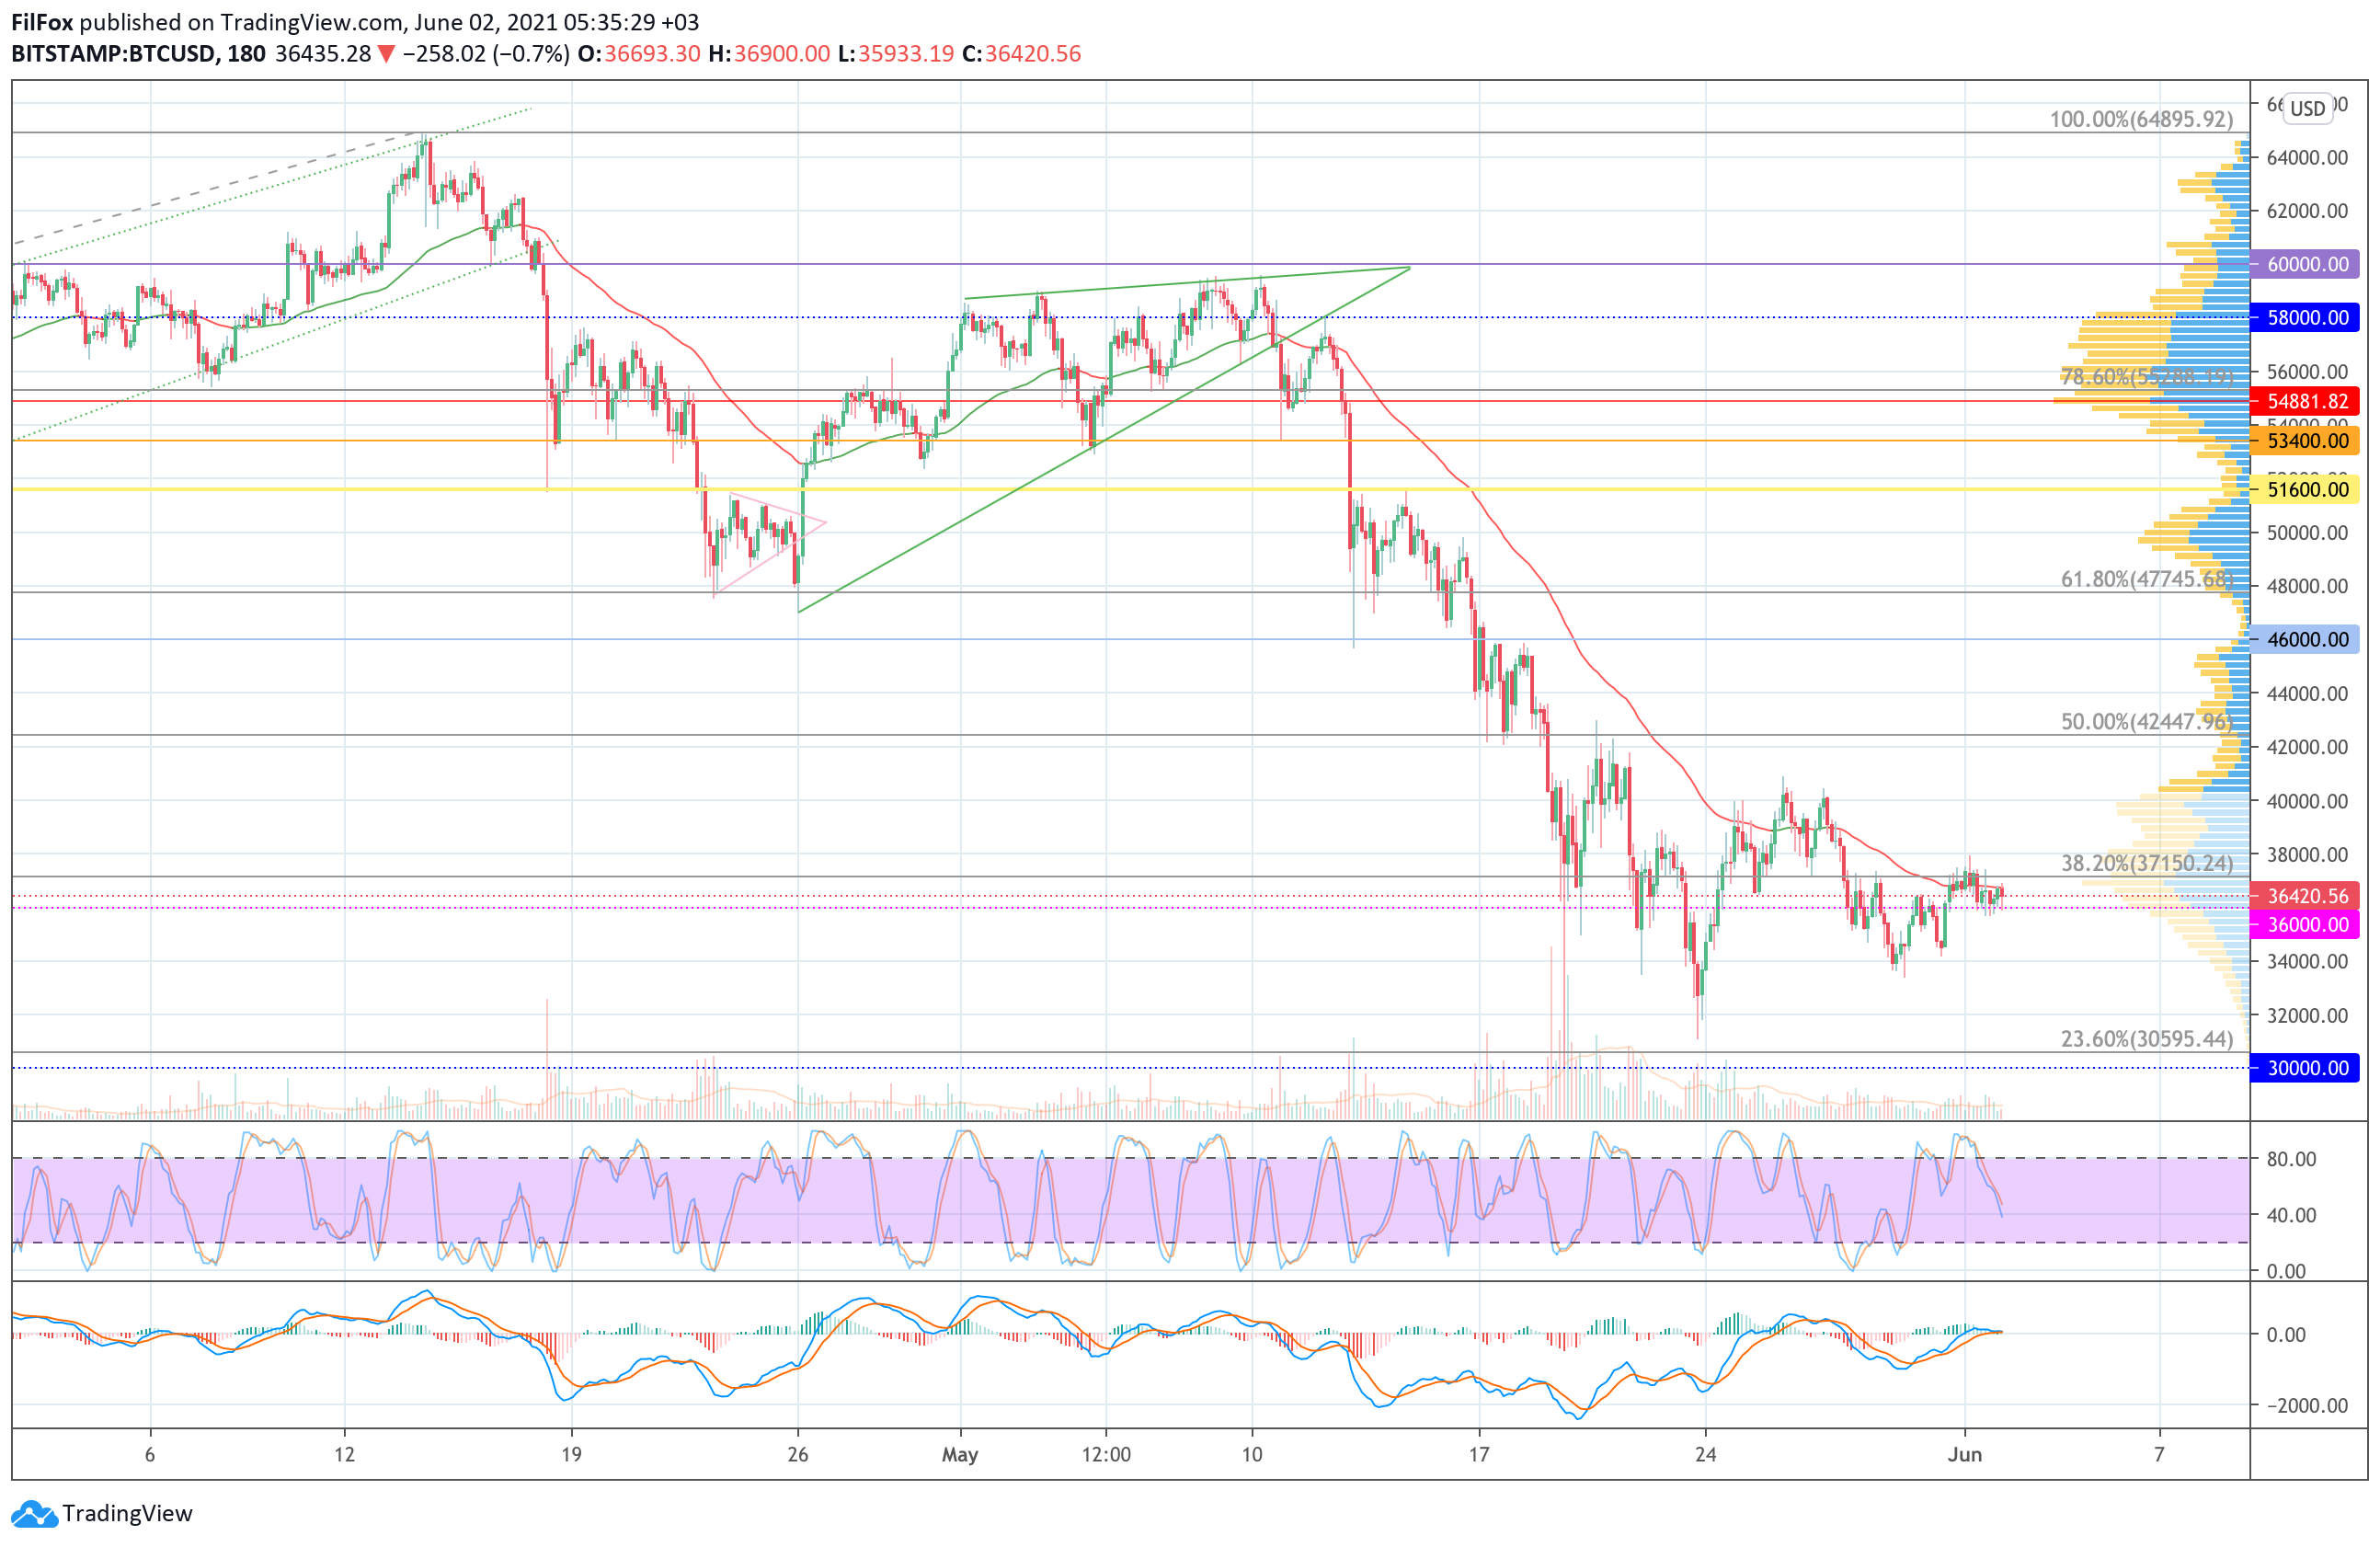 Analysis of prices for Bitcoin, Ethereum, XRP for 06/02/2021